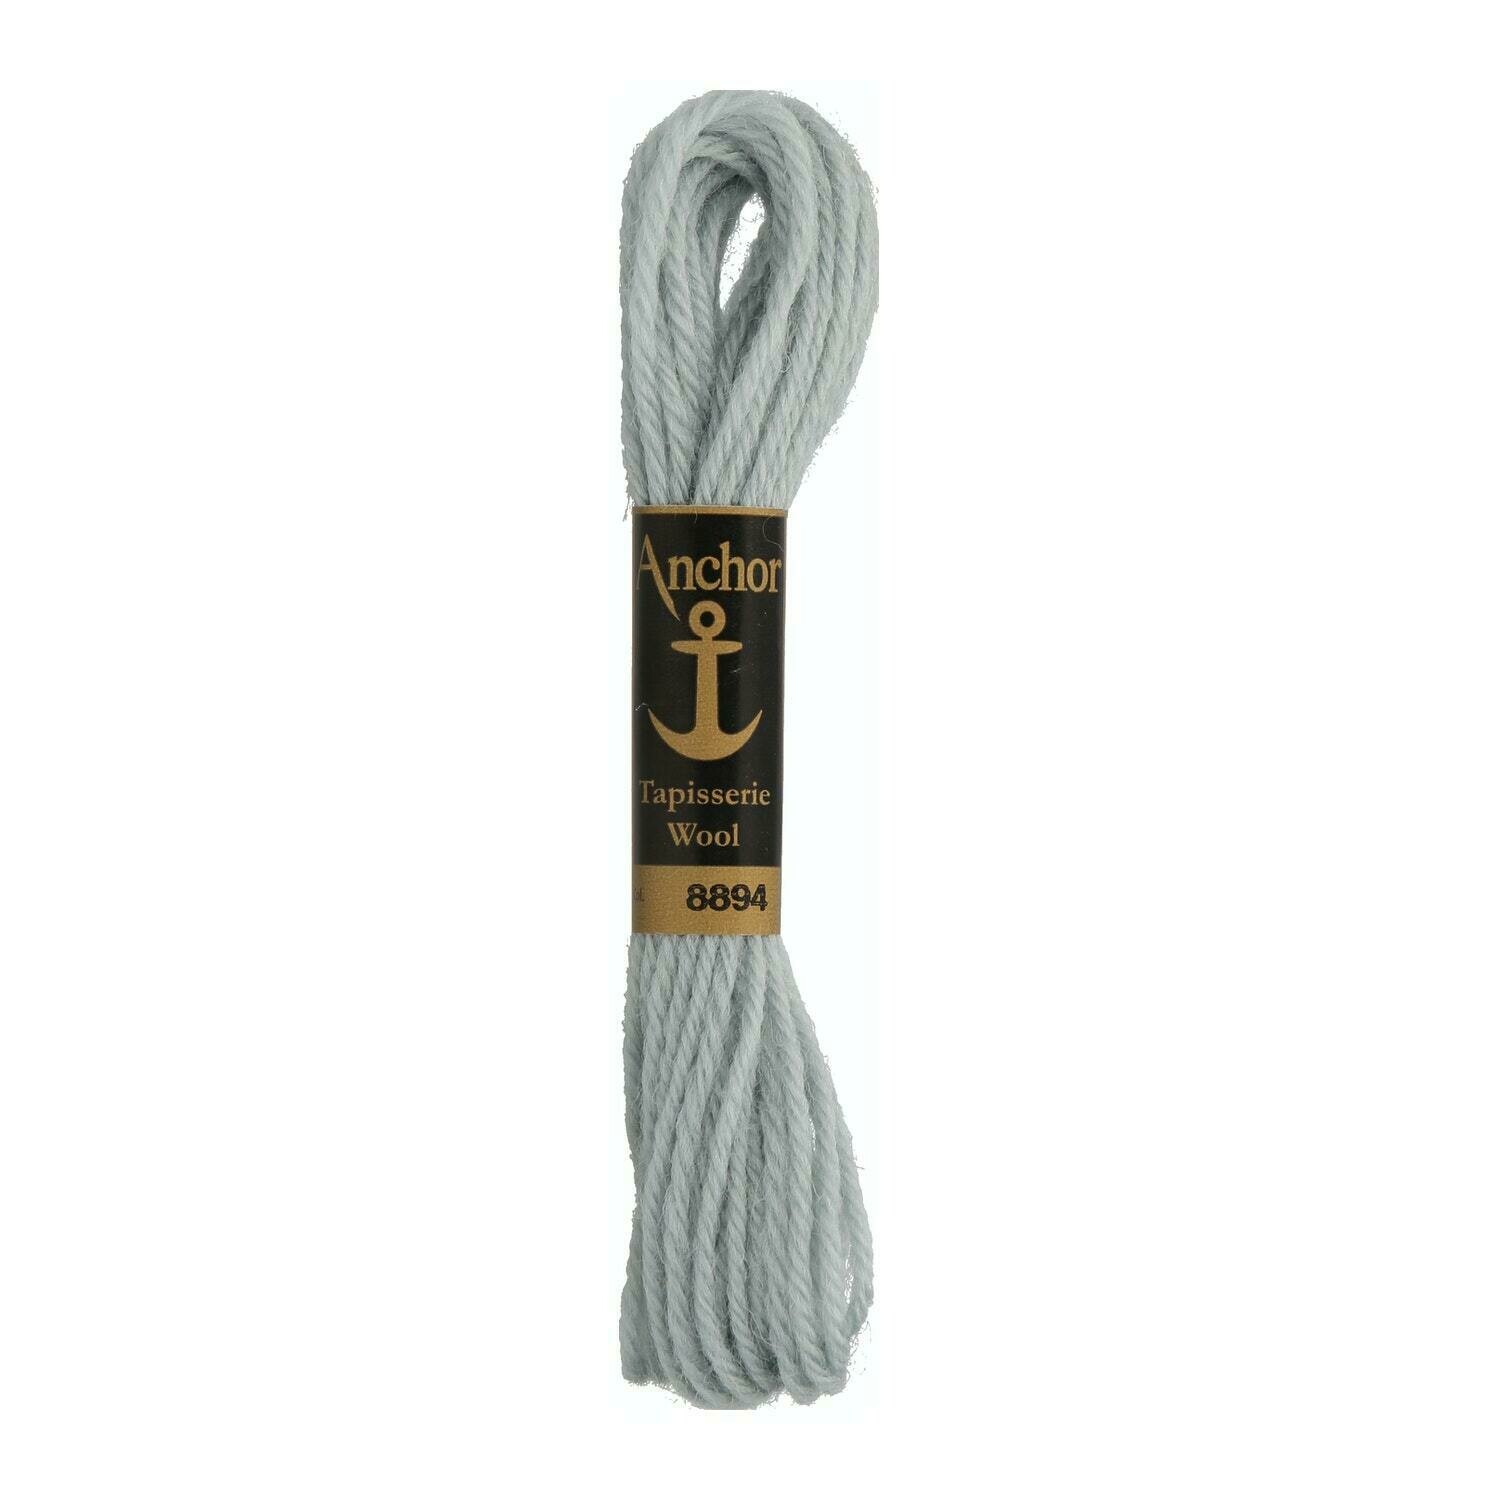 Anchor Tapisserie Wool #09008